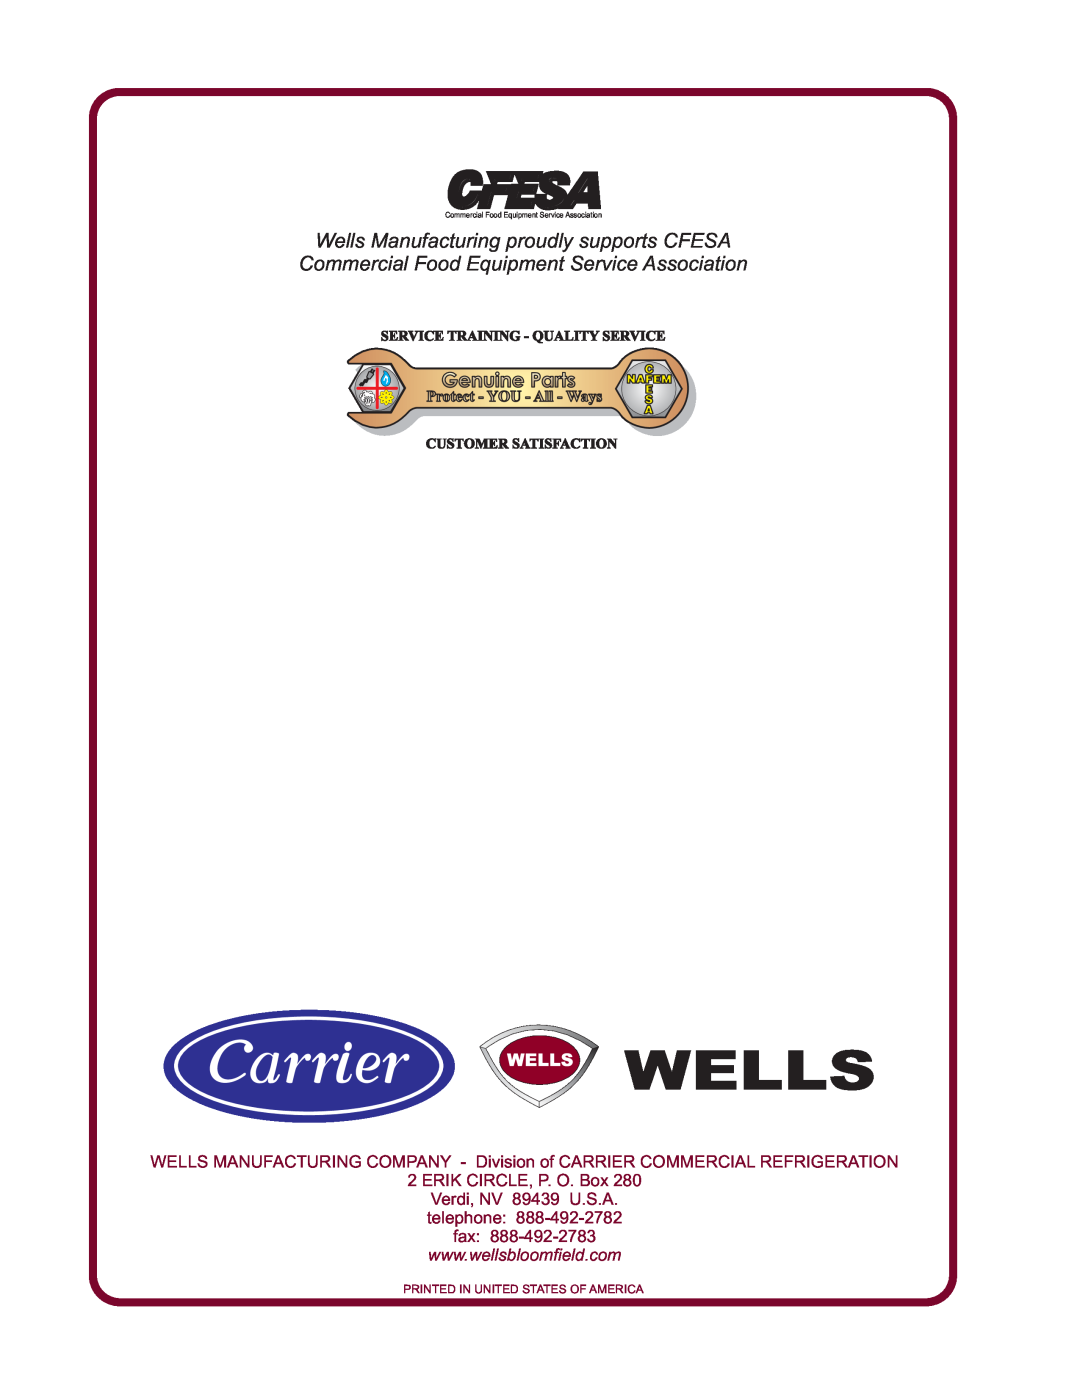 Bloomfield WFAE-55FS Genuine Parts, ERIK CIRCLE, P. O. Box, Wells Manufacturing proudly supports CFESA 